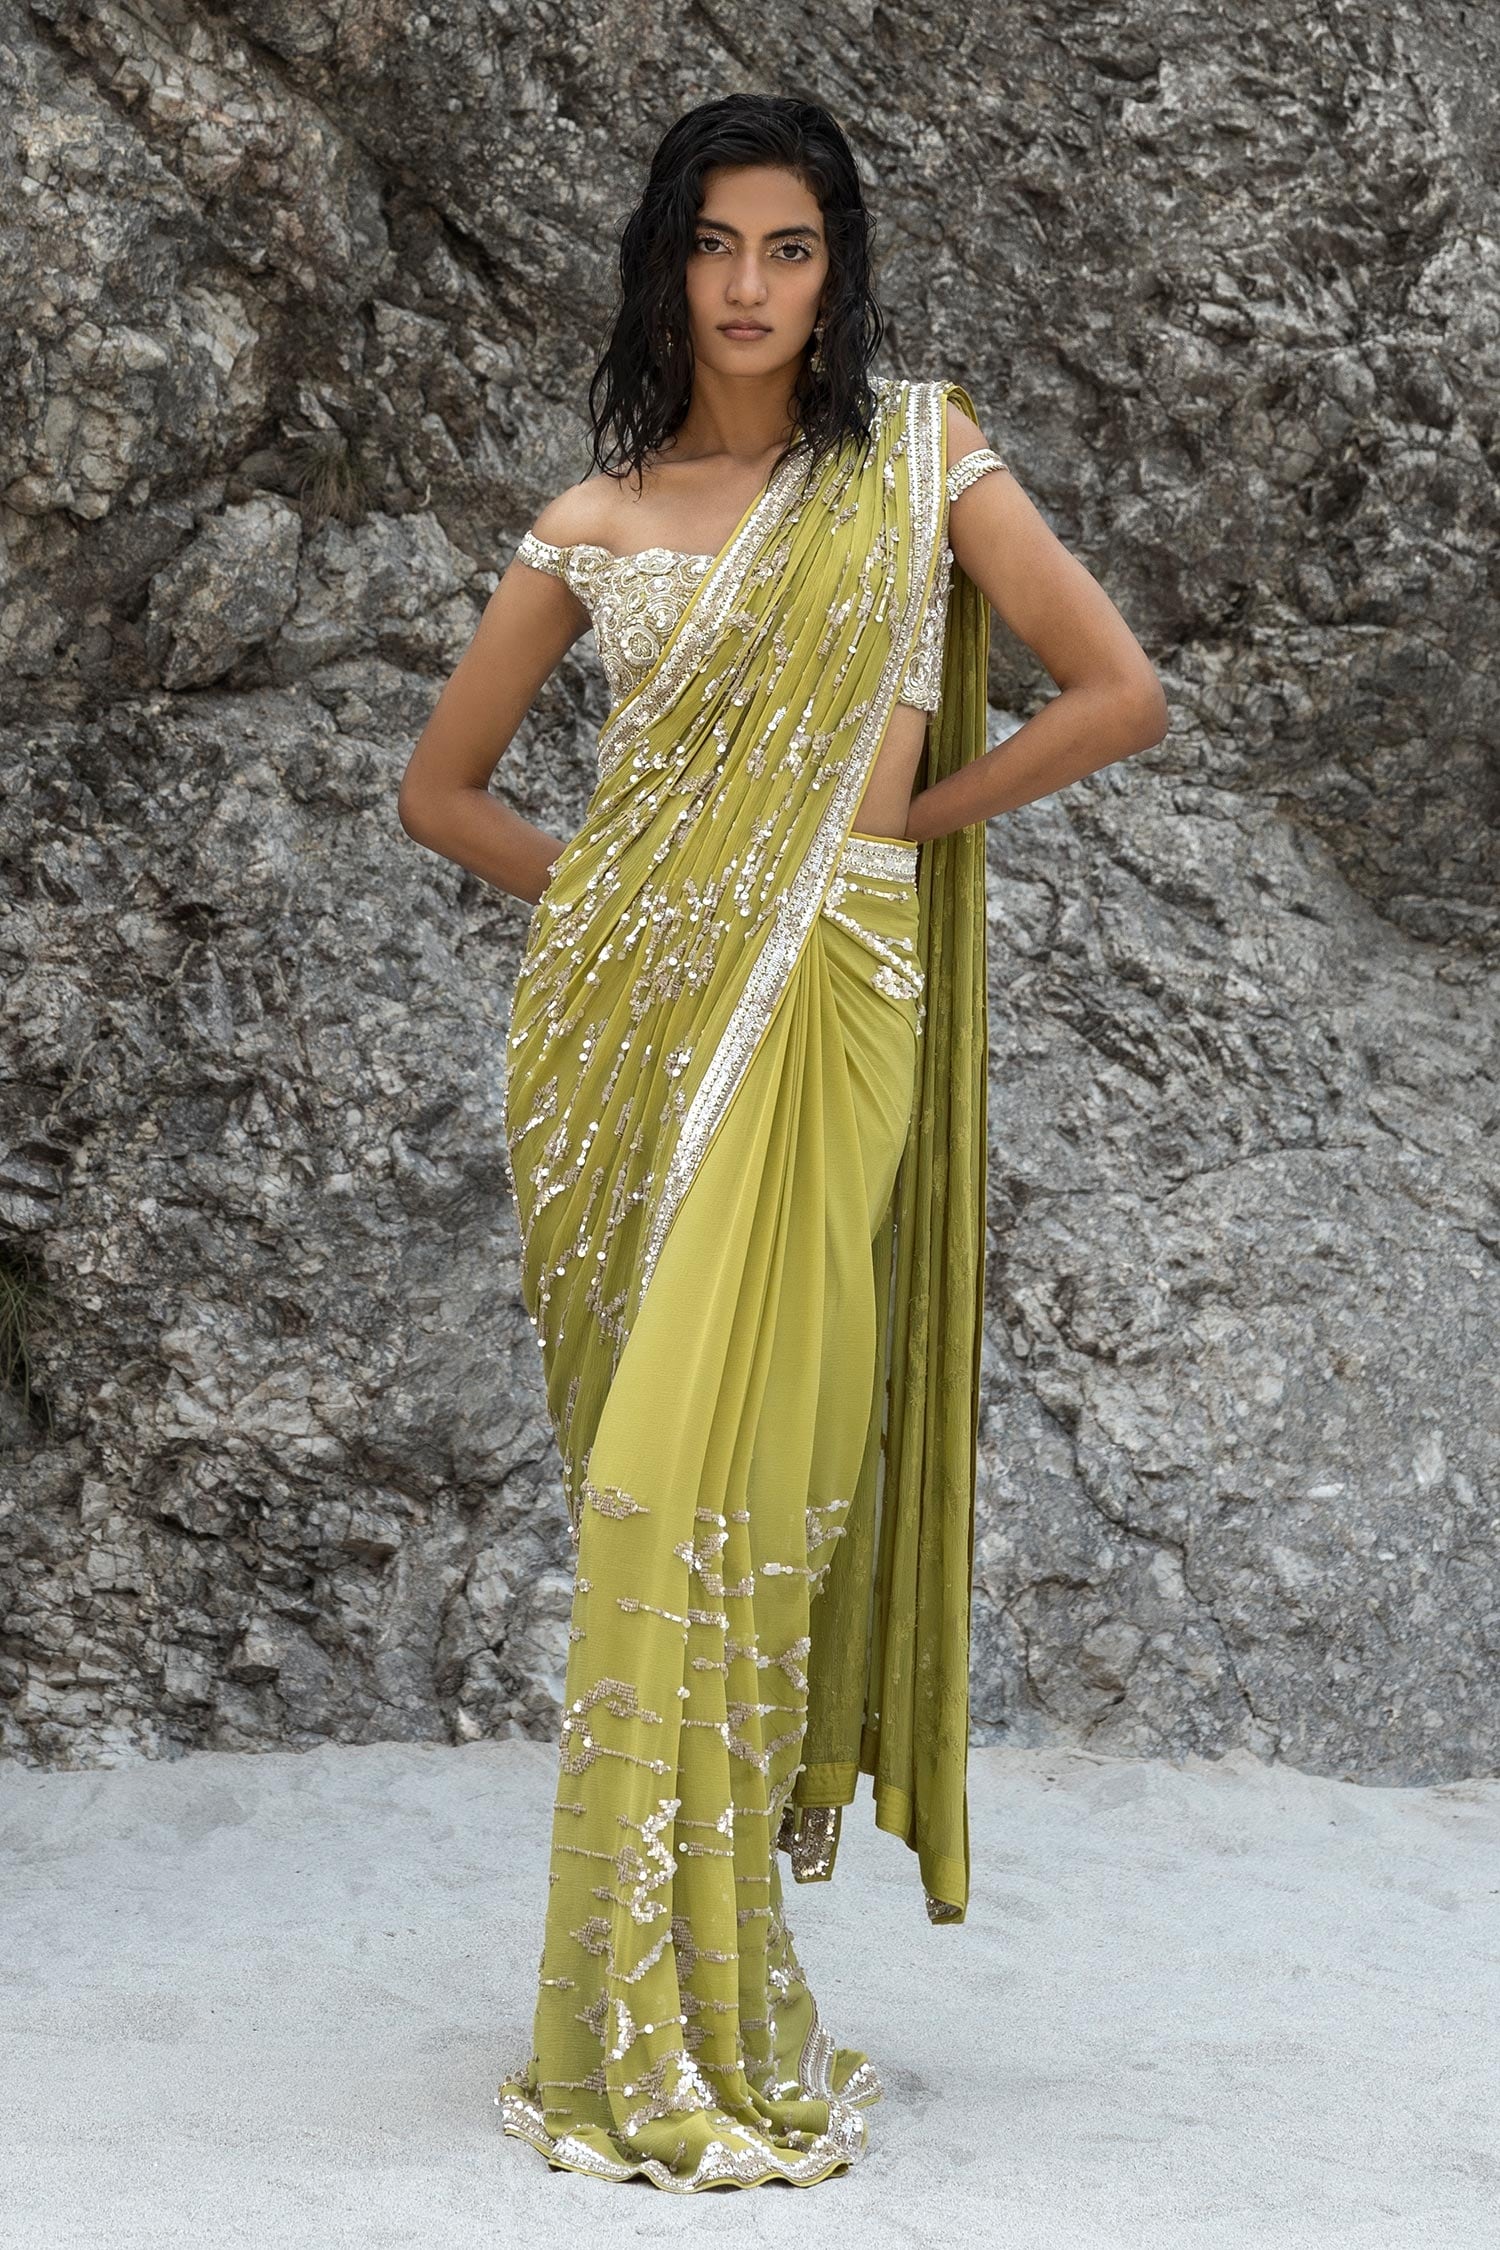 Chic Woven Traditional Saree